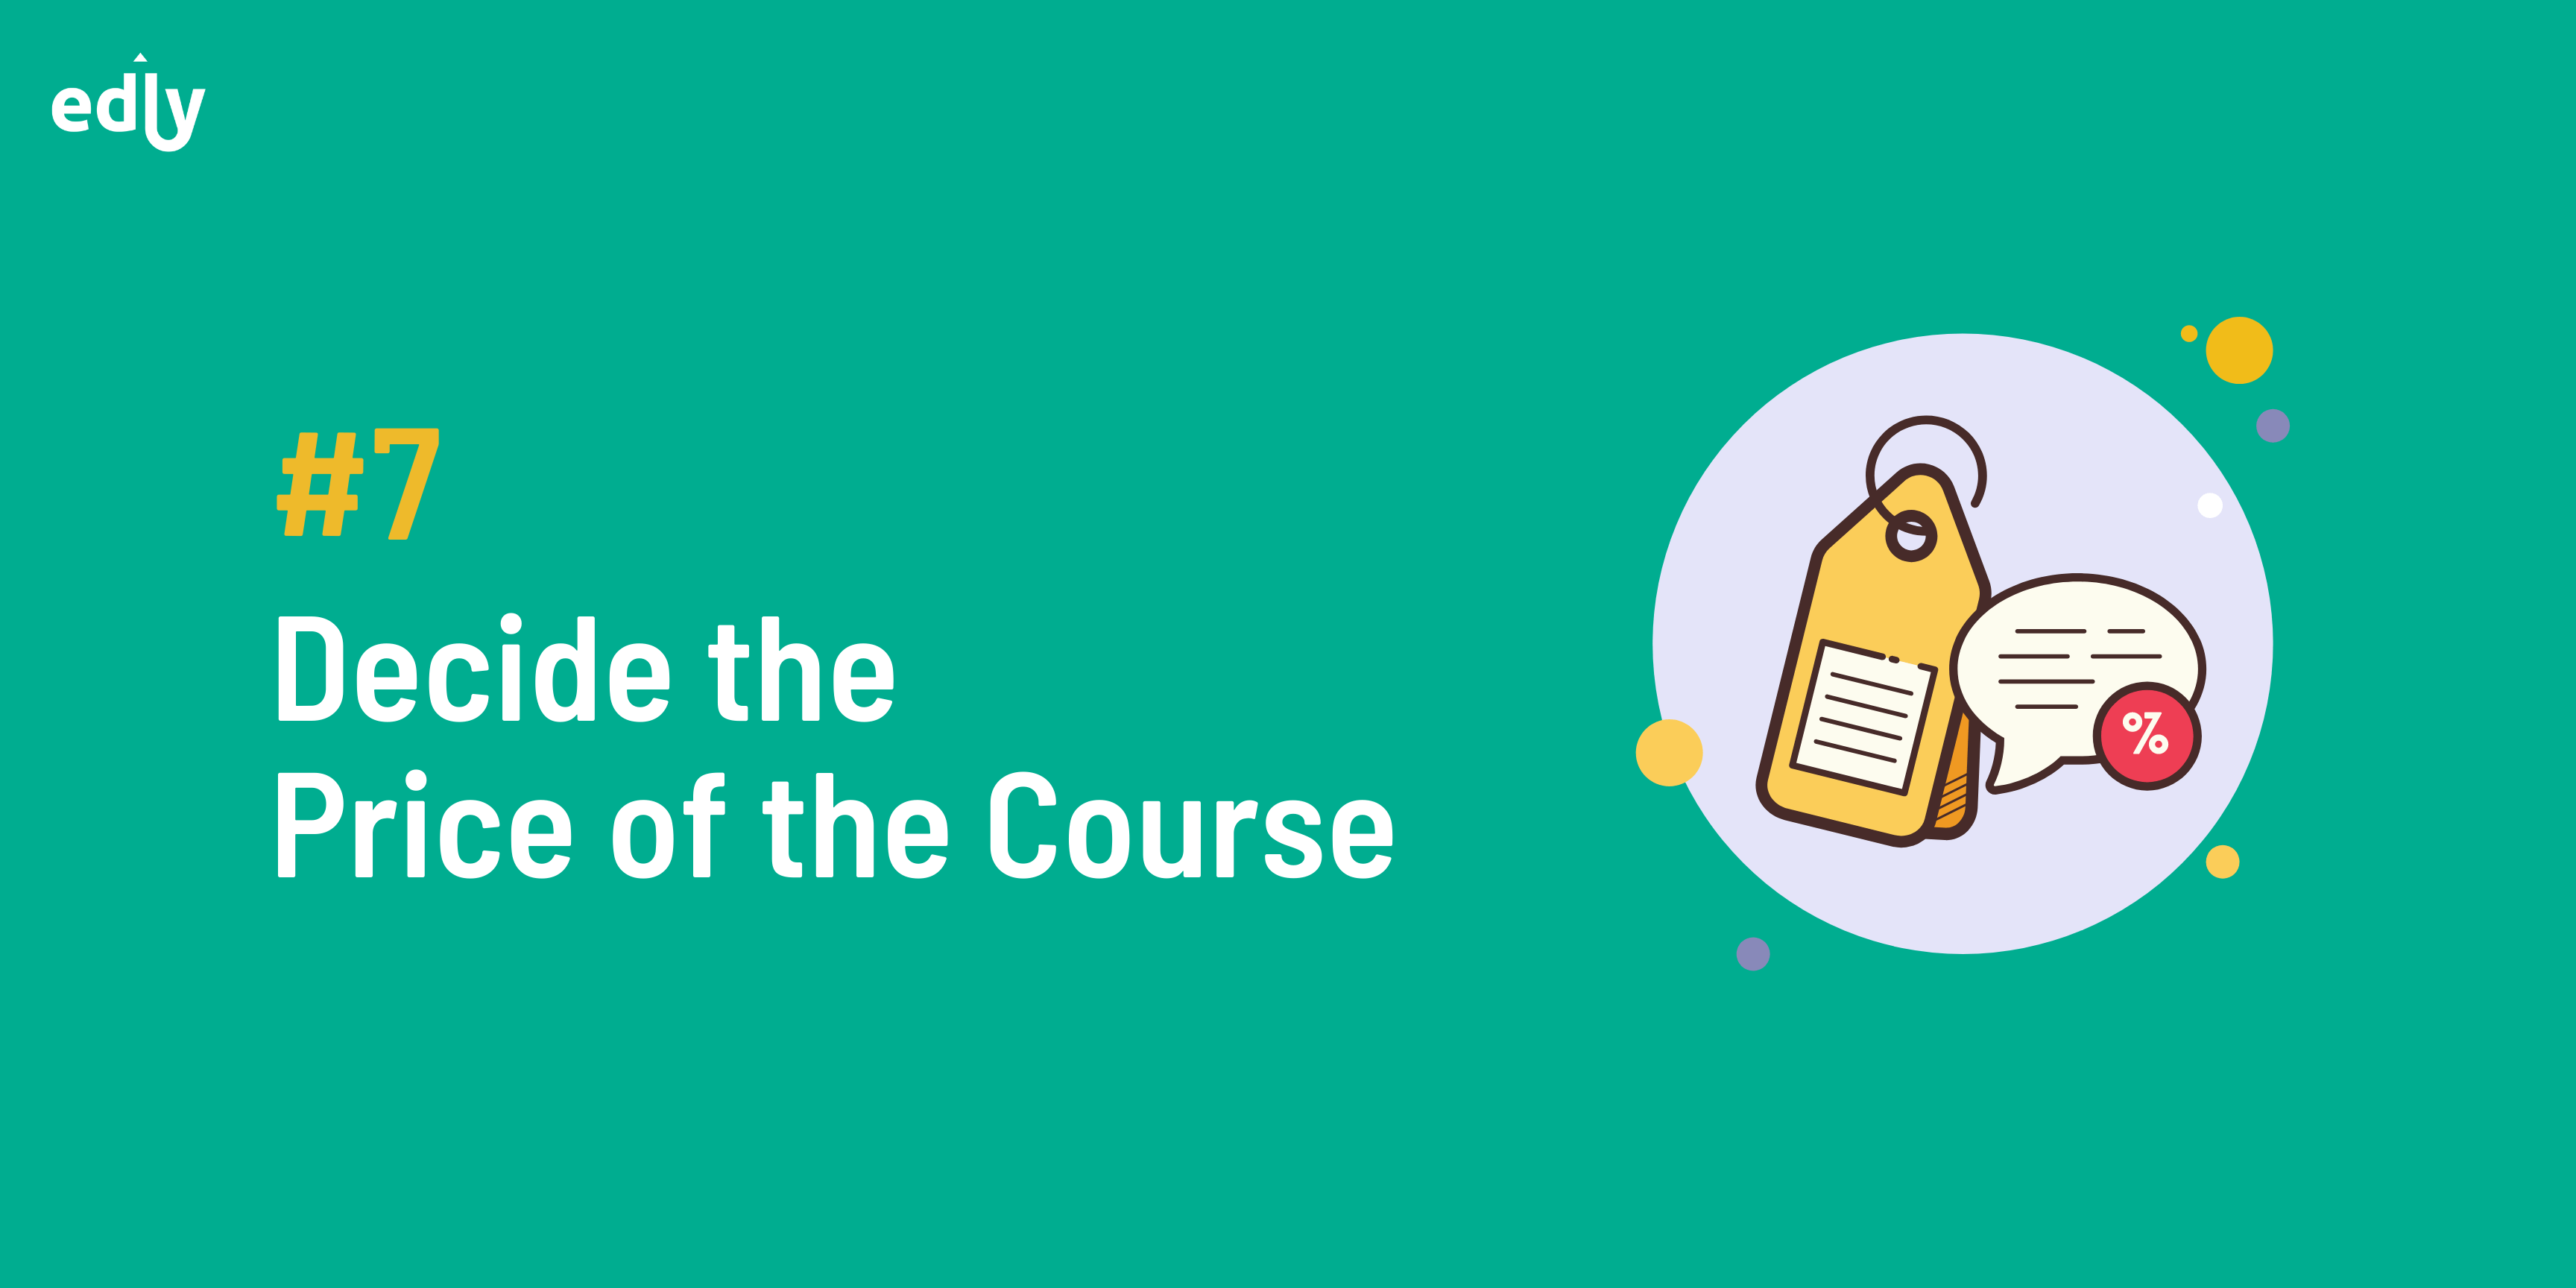 Decide the Price of the Course